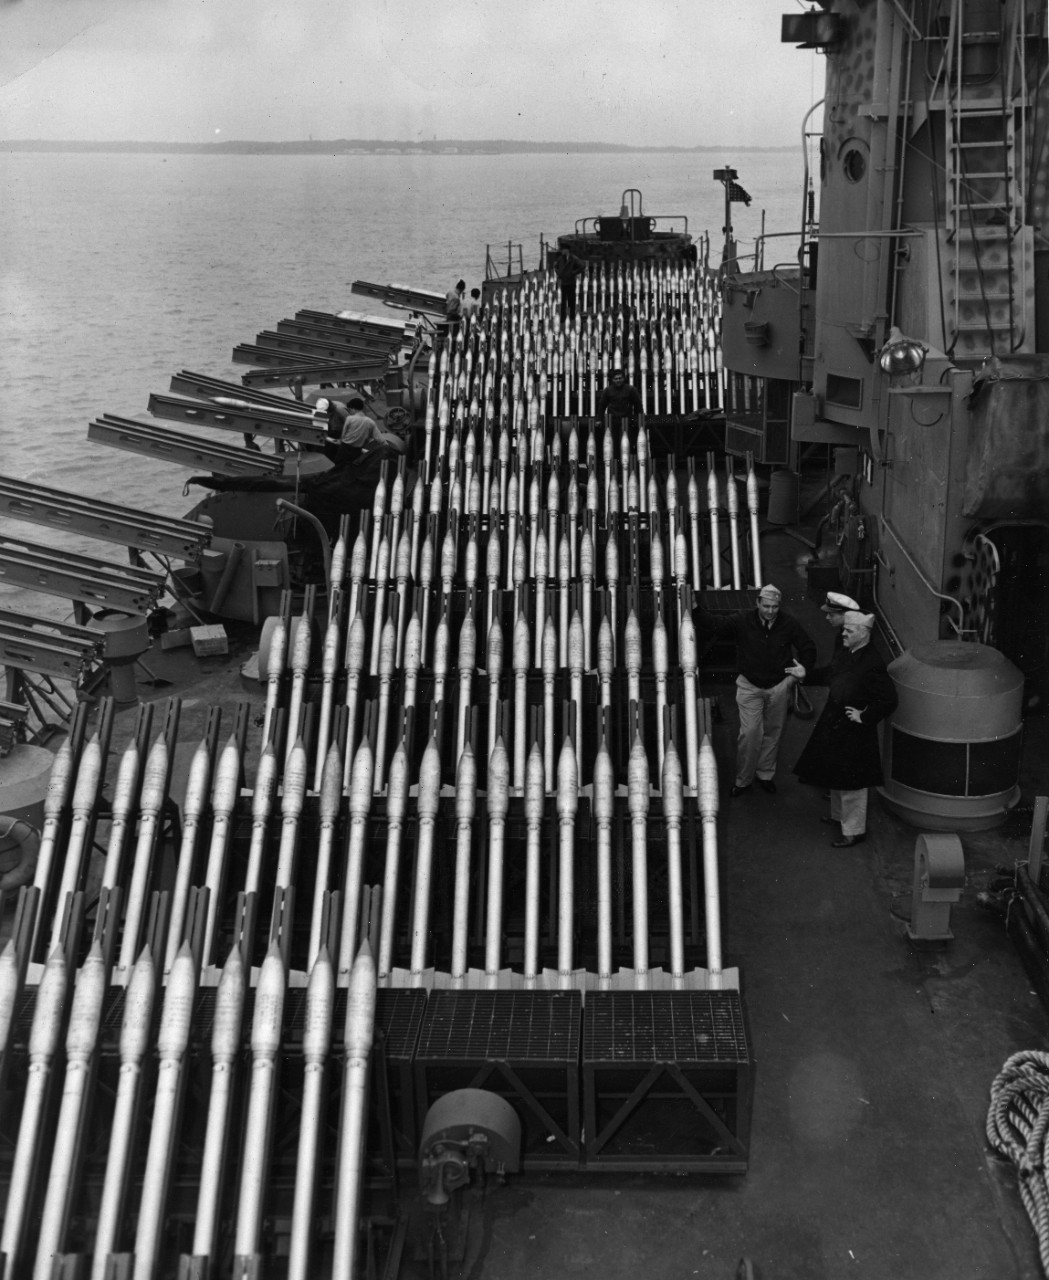 Rows of rocket launchers, loaded with their deadly missiles, add immeasurably to the firepower of this Navy landing craft. Light and mobile, the self-propelled weapons have played a major role in World War II.